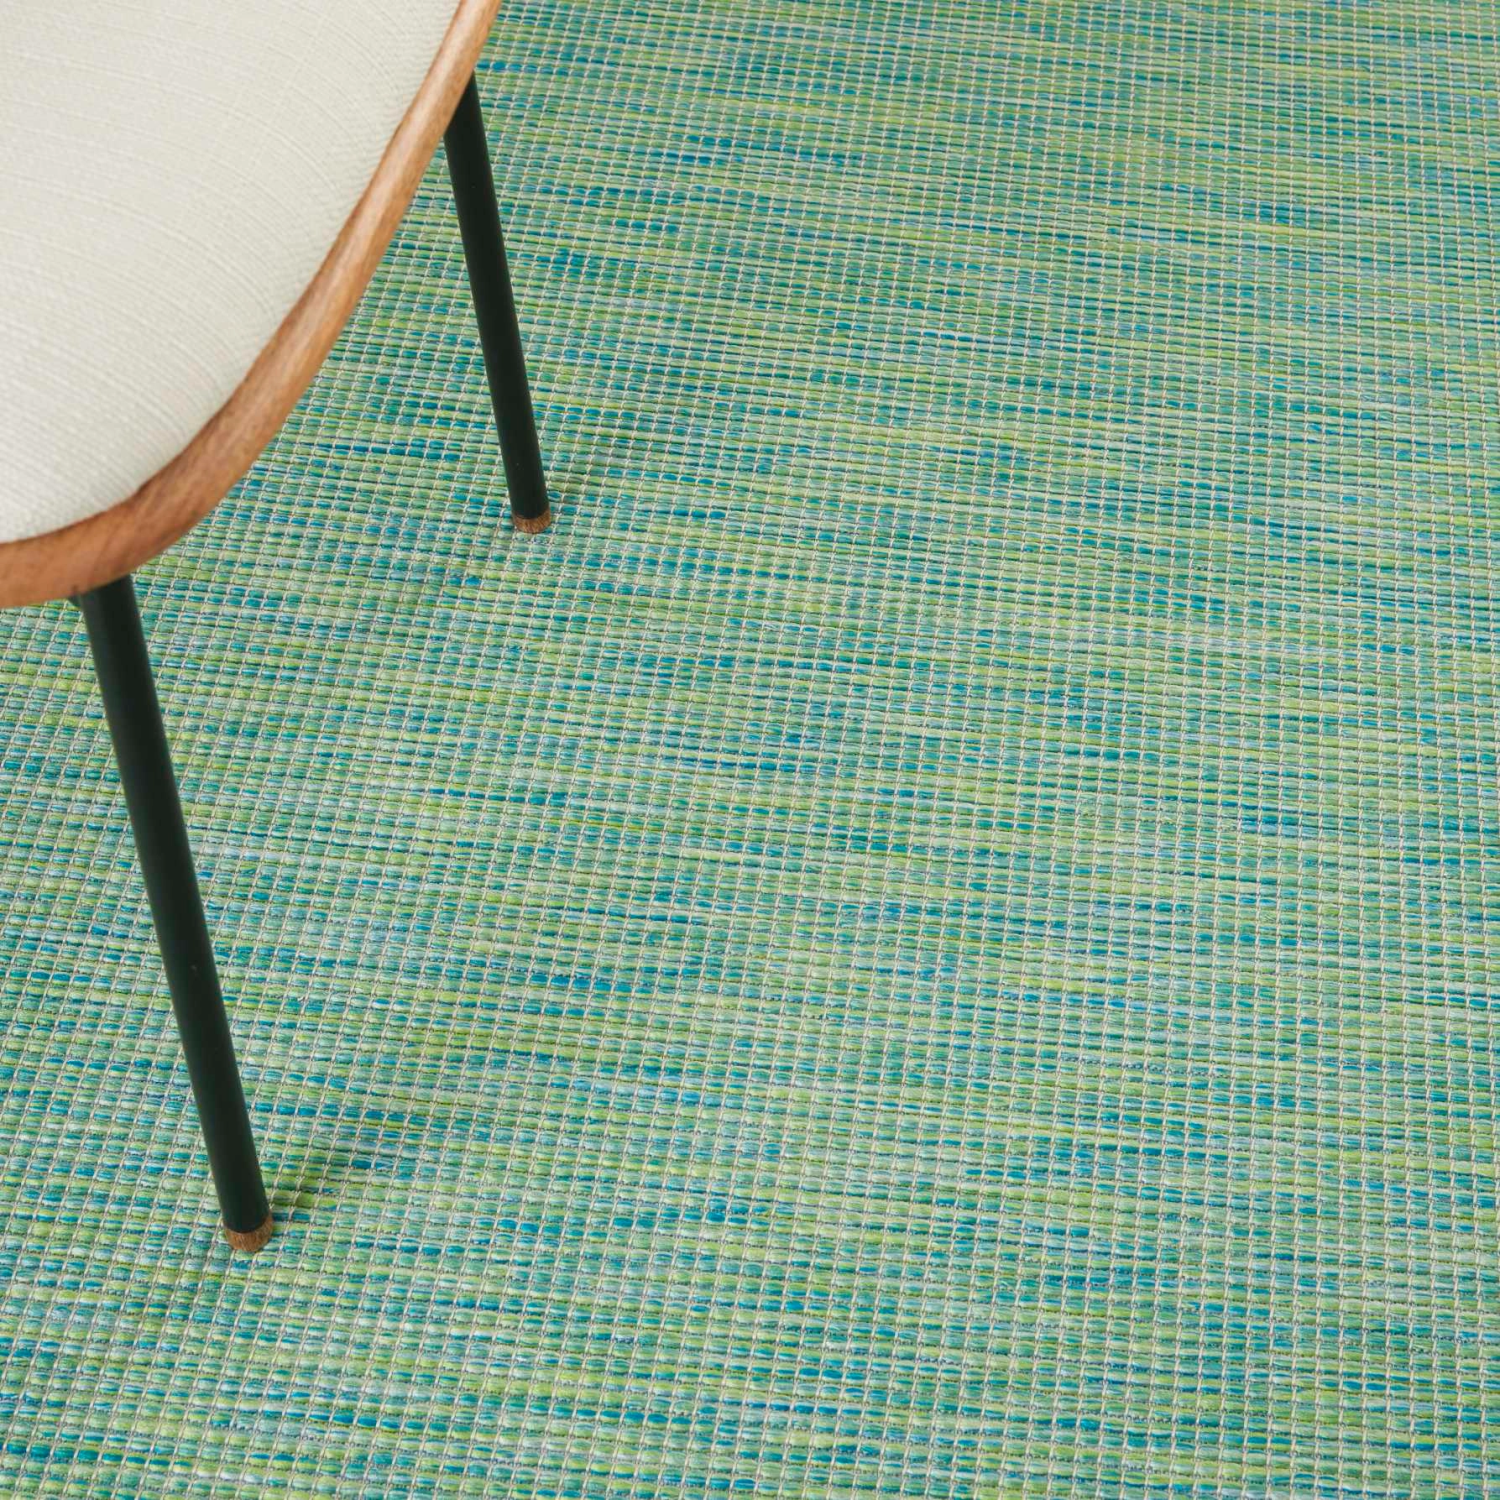 Positano Rug Blue Green Close Up of Rug with Chair on Top